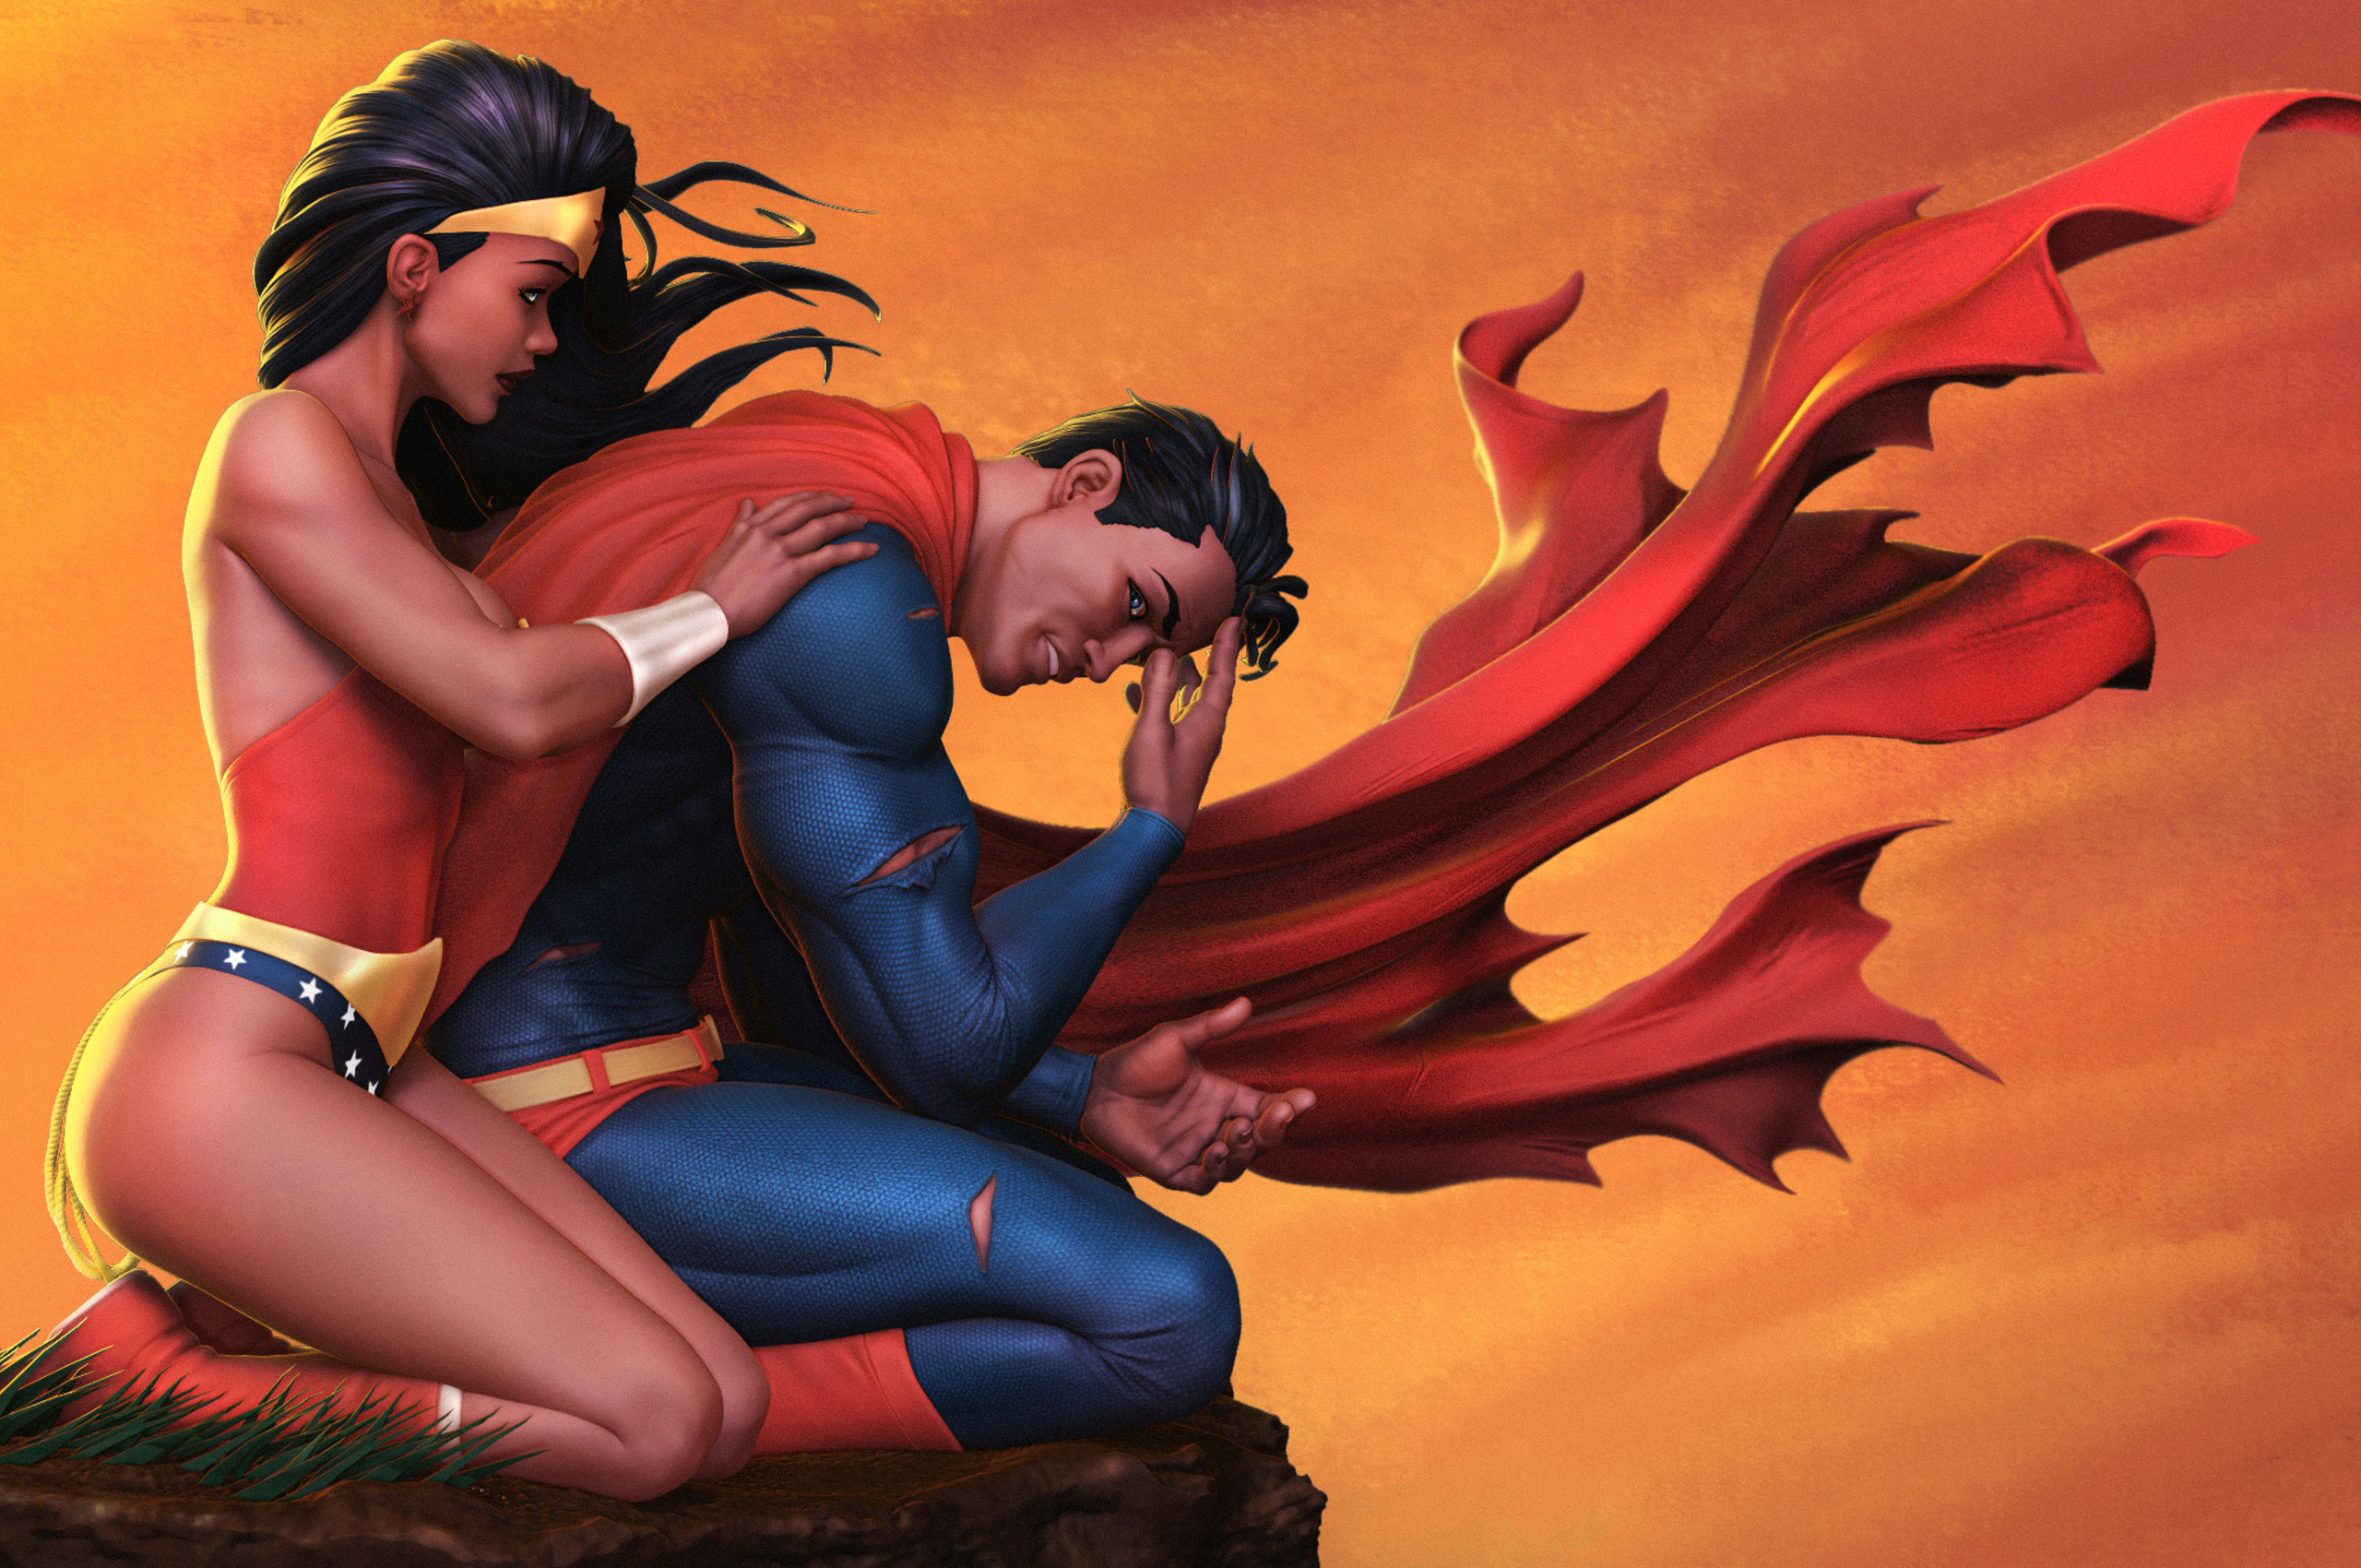 Superman And Wonder Woman In 2560x1700 Resolution. superman-and-wonder-woma...